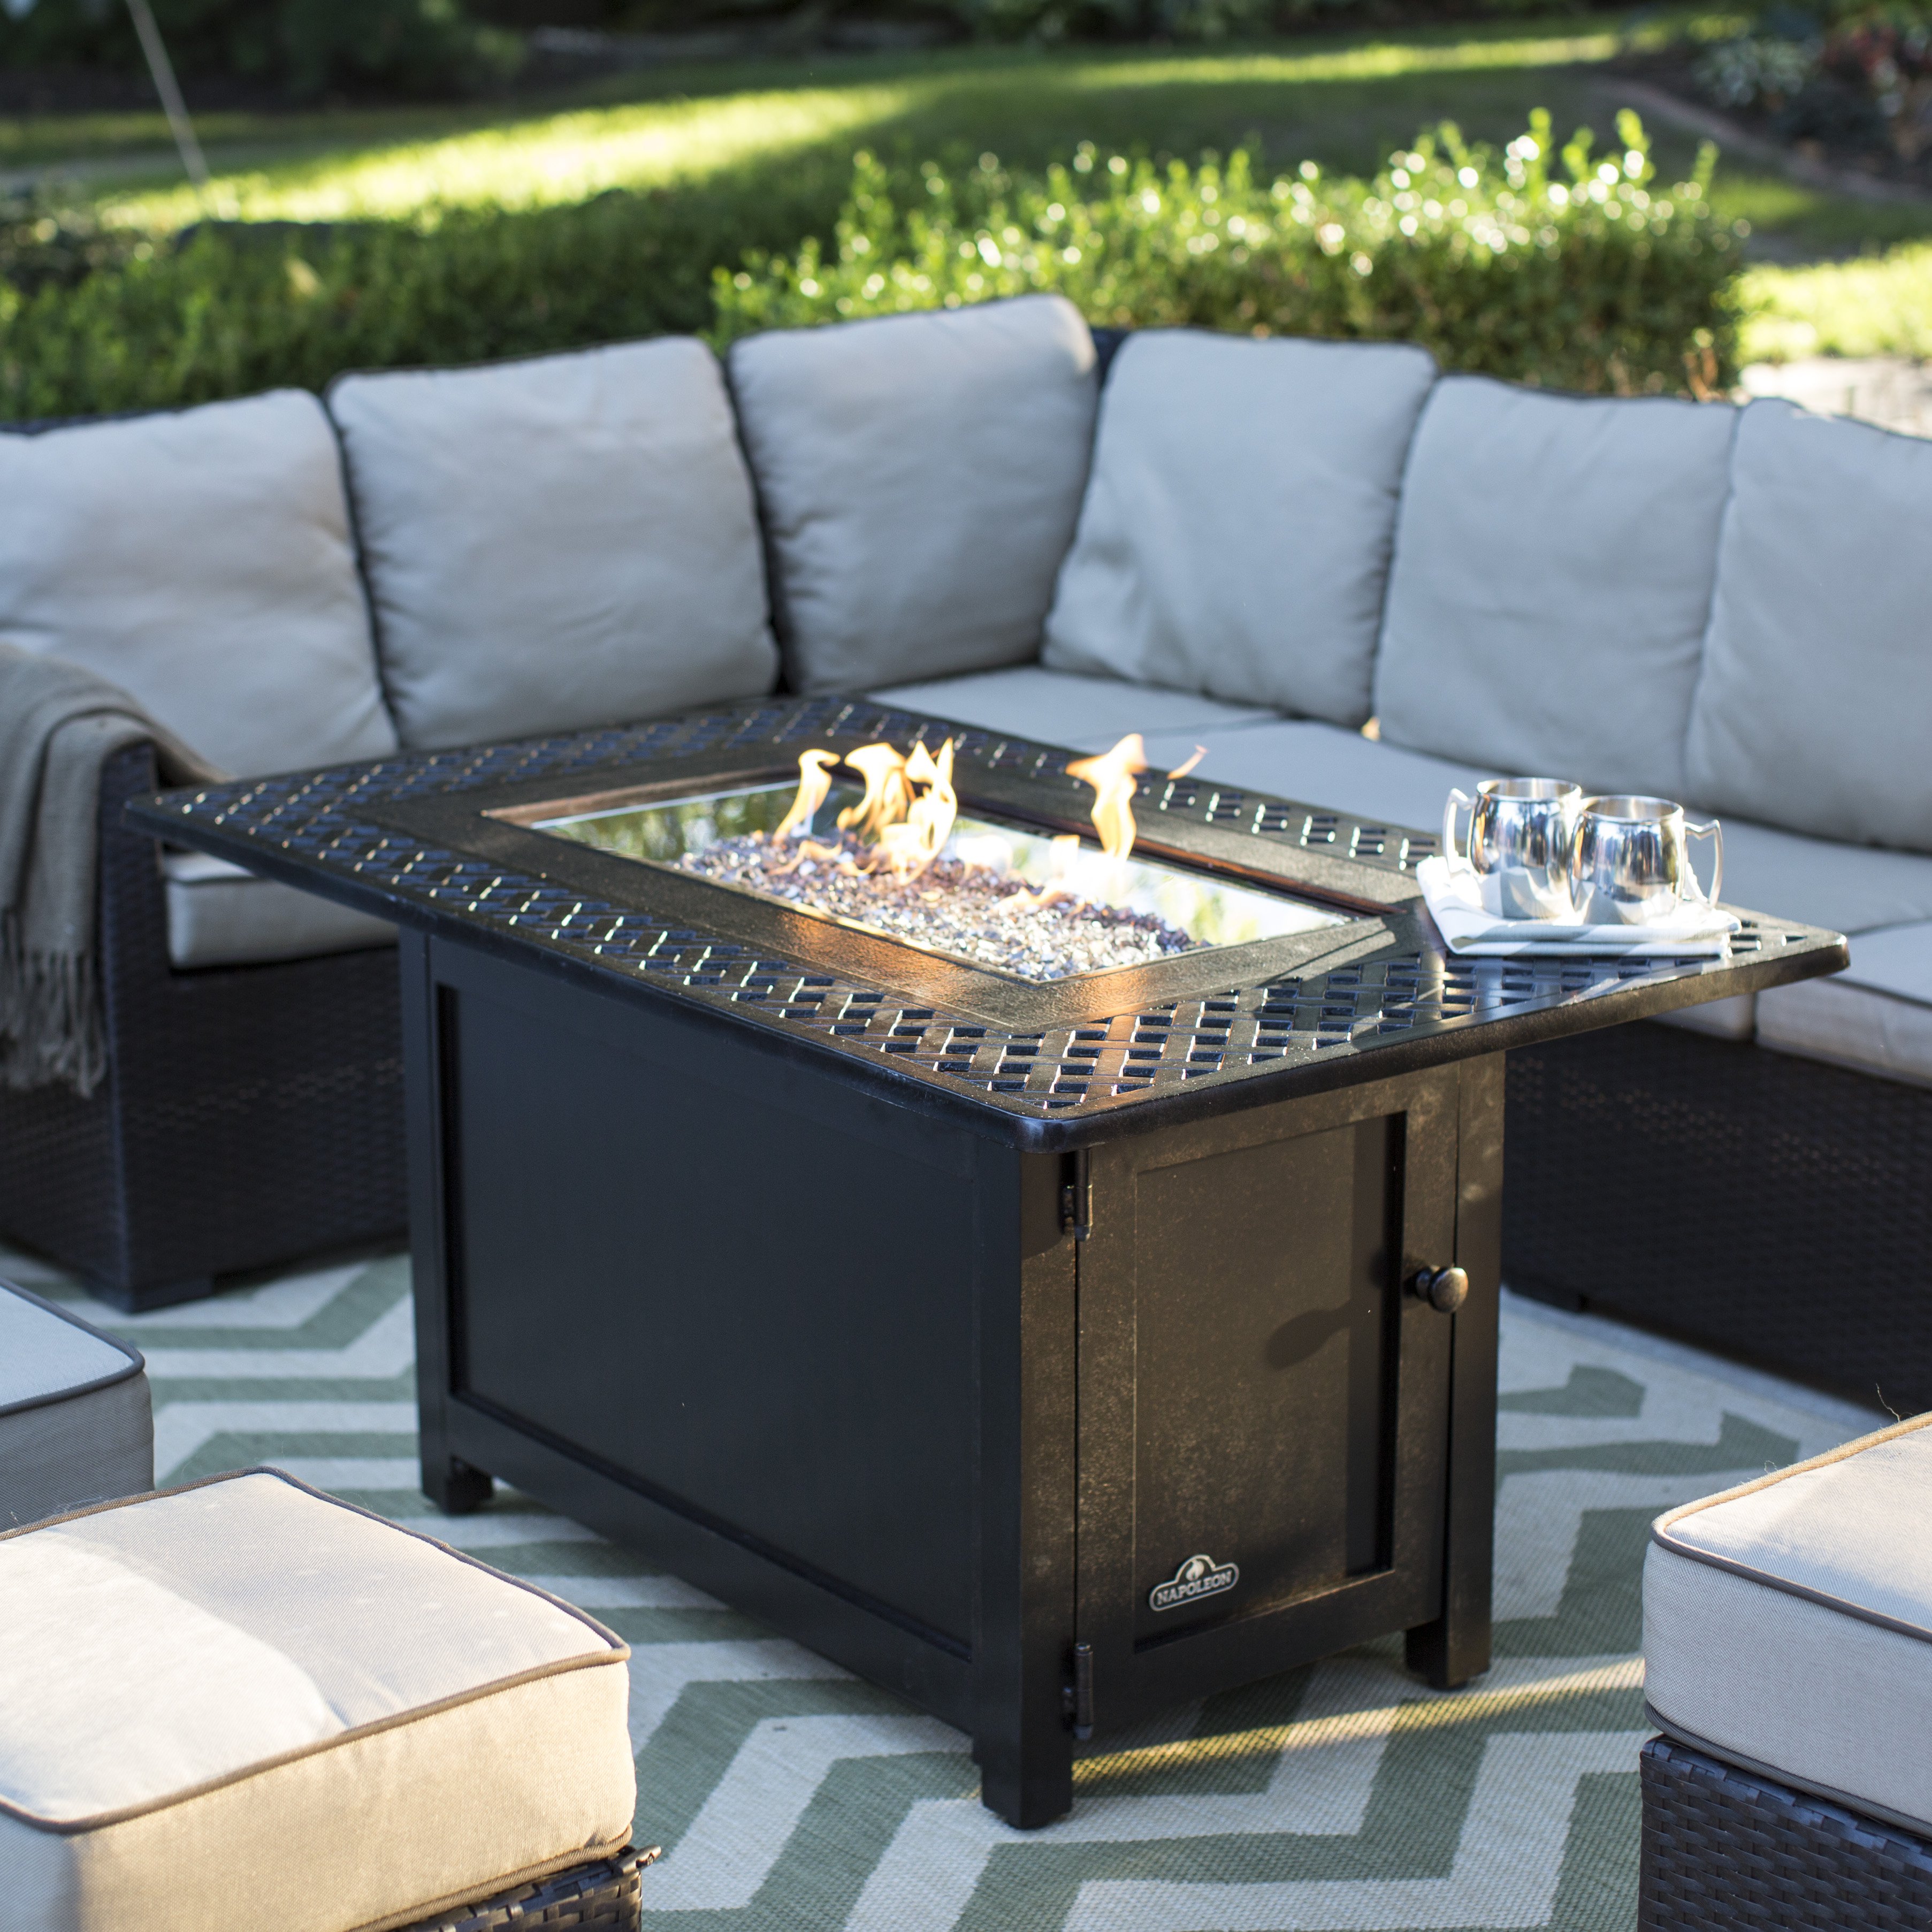 Propane Tabletop Fireplace Unique Patio Table with Gas Fire Home